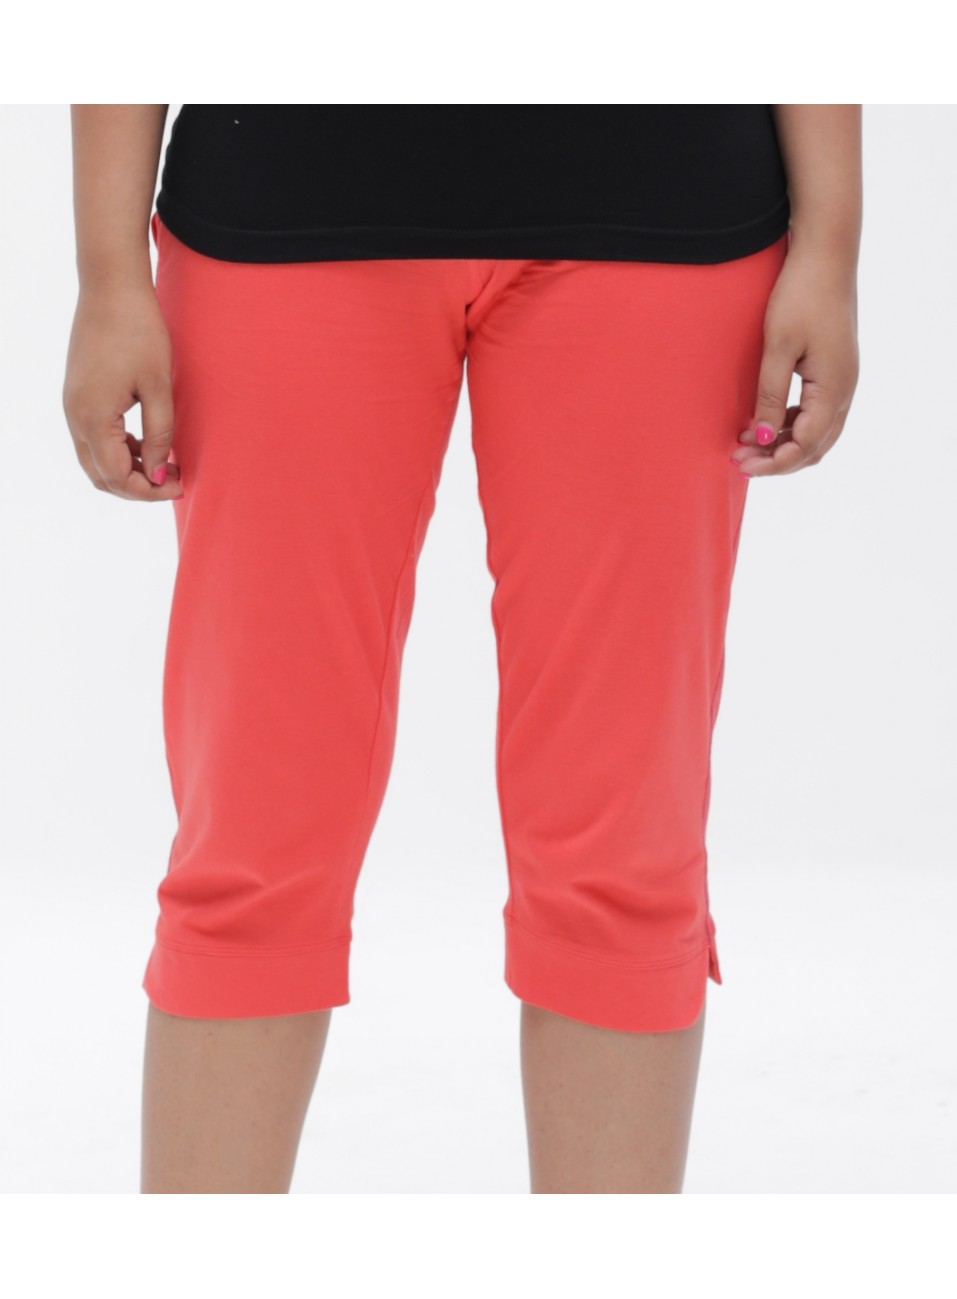 PURE SOFT COTTON CAPRI FOR GIRLS & WOMEN WITH ONE SIDE POCKET